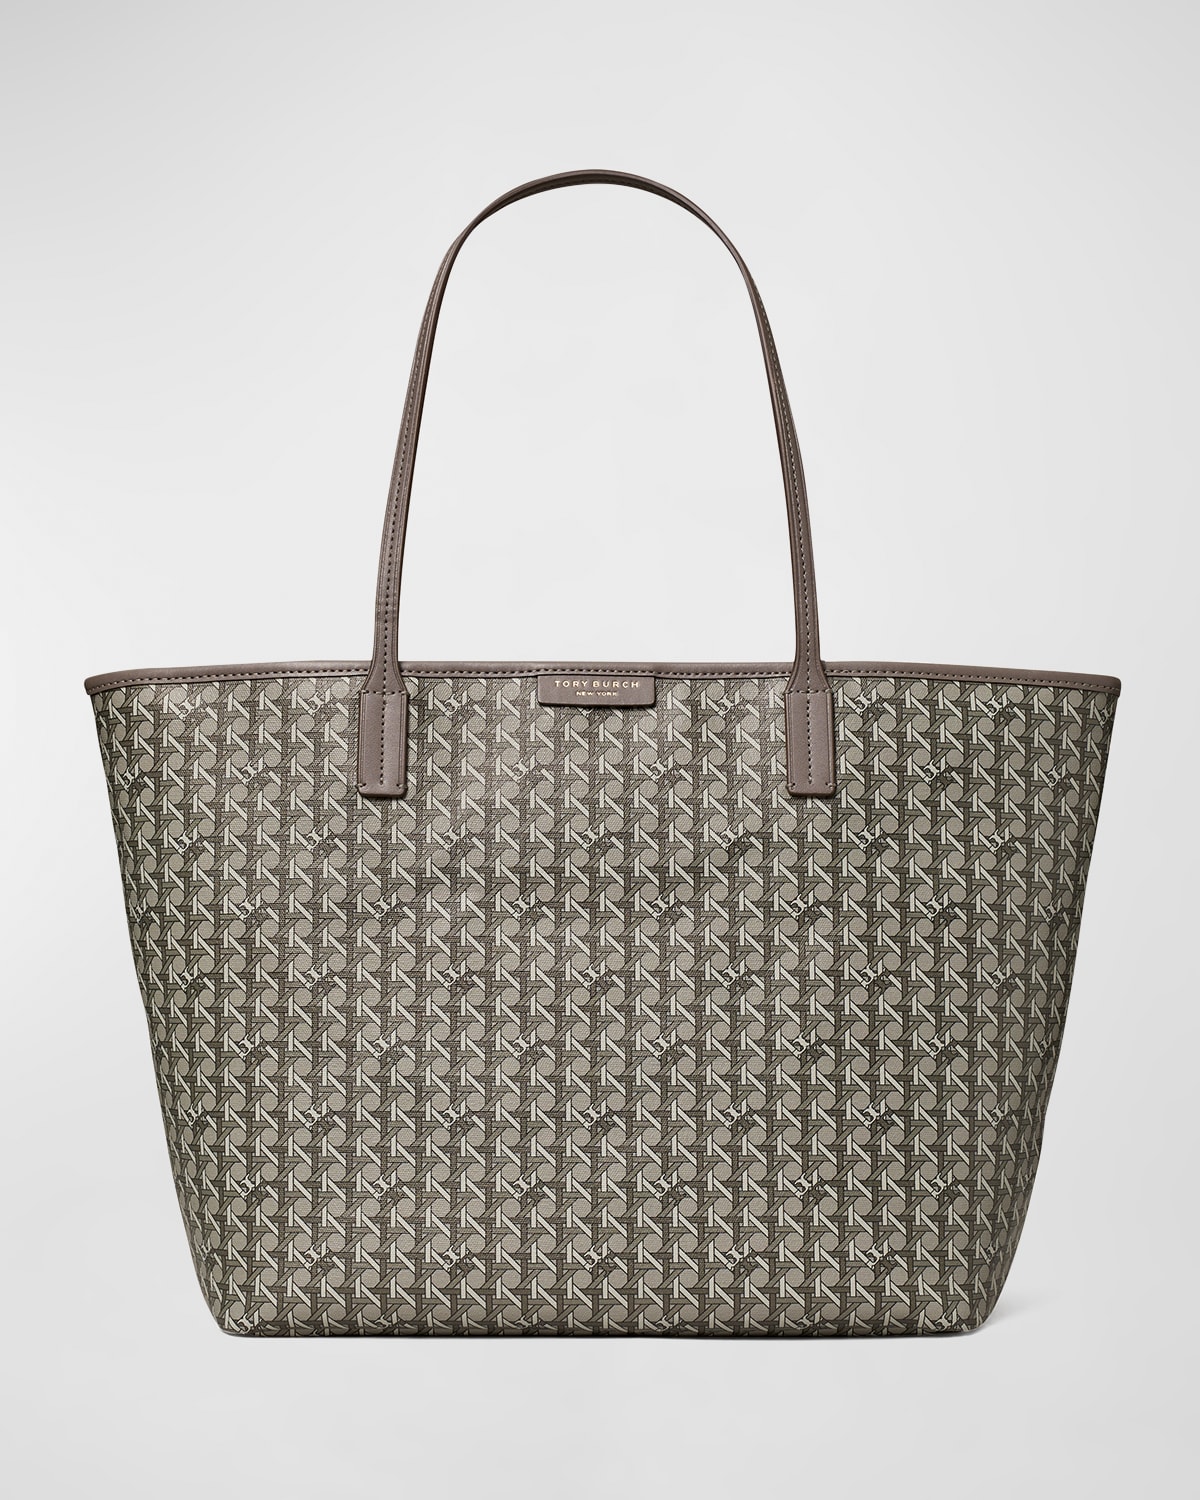 TORY BURCH EVERY-READY WOVEN MONOGRAM TOTE BAG